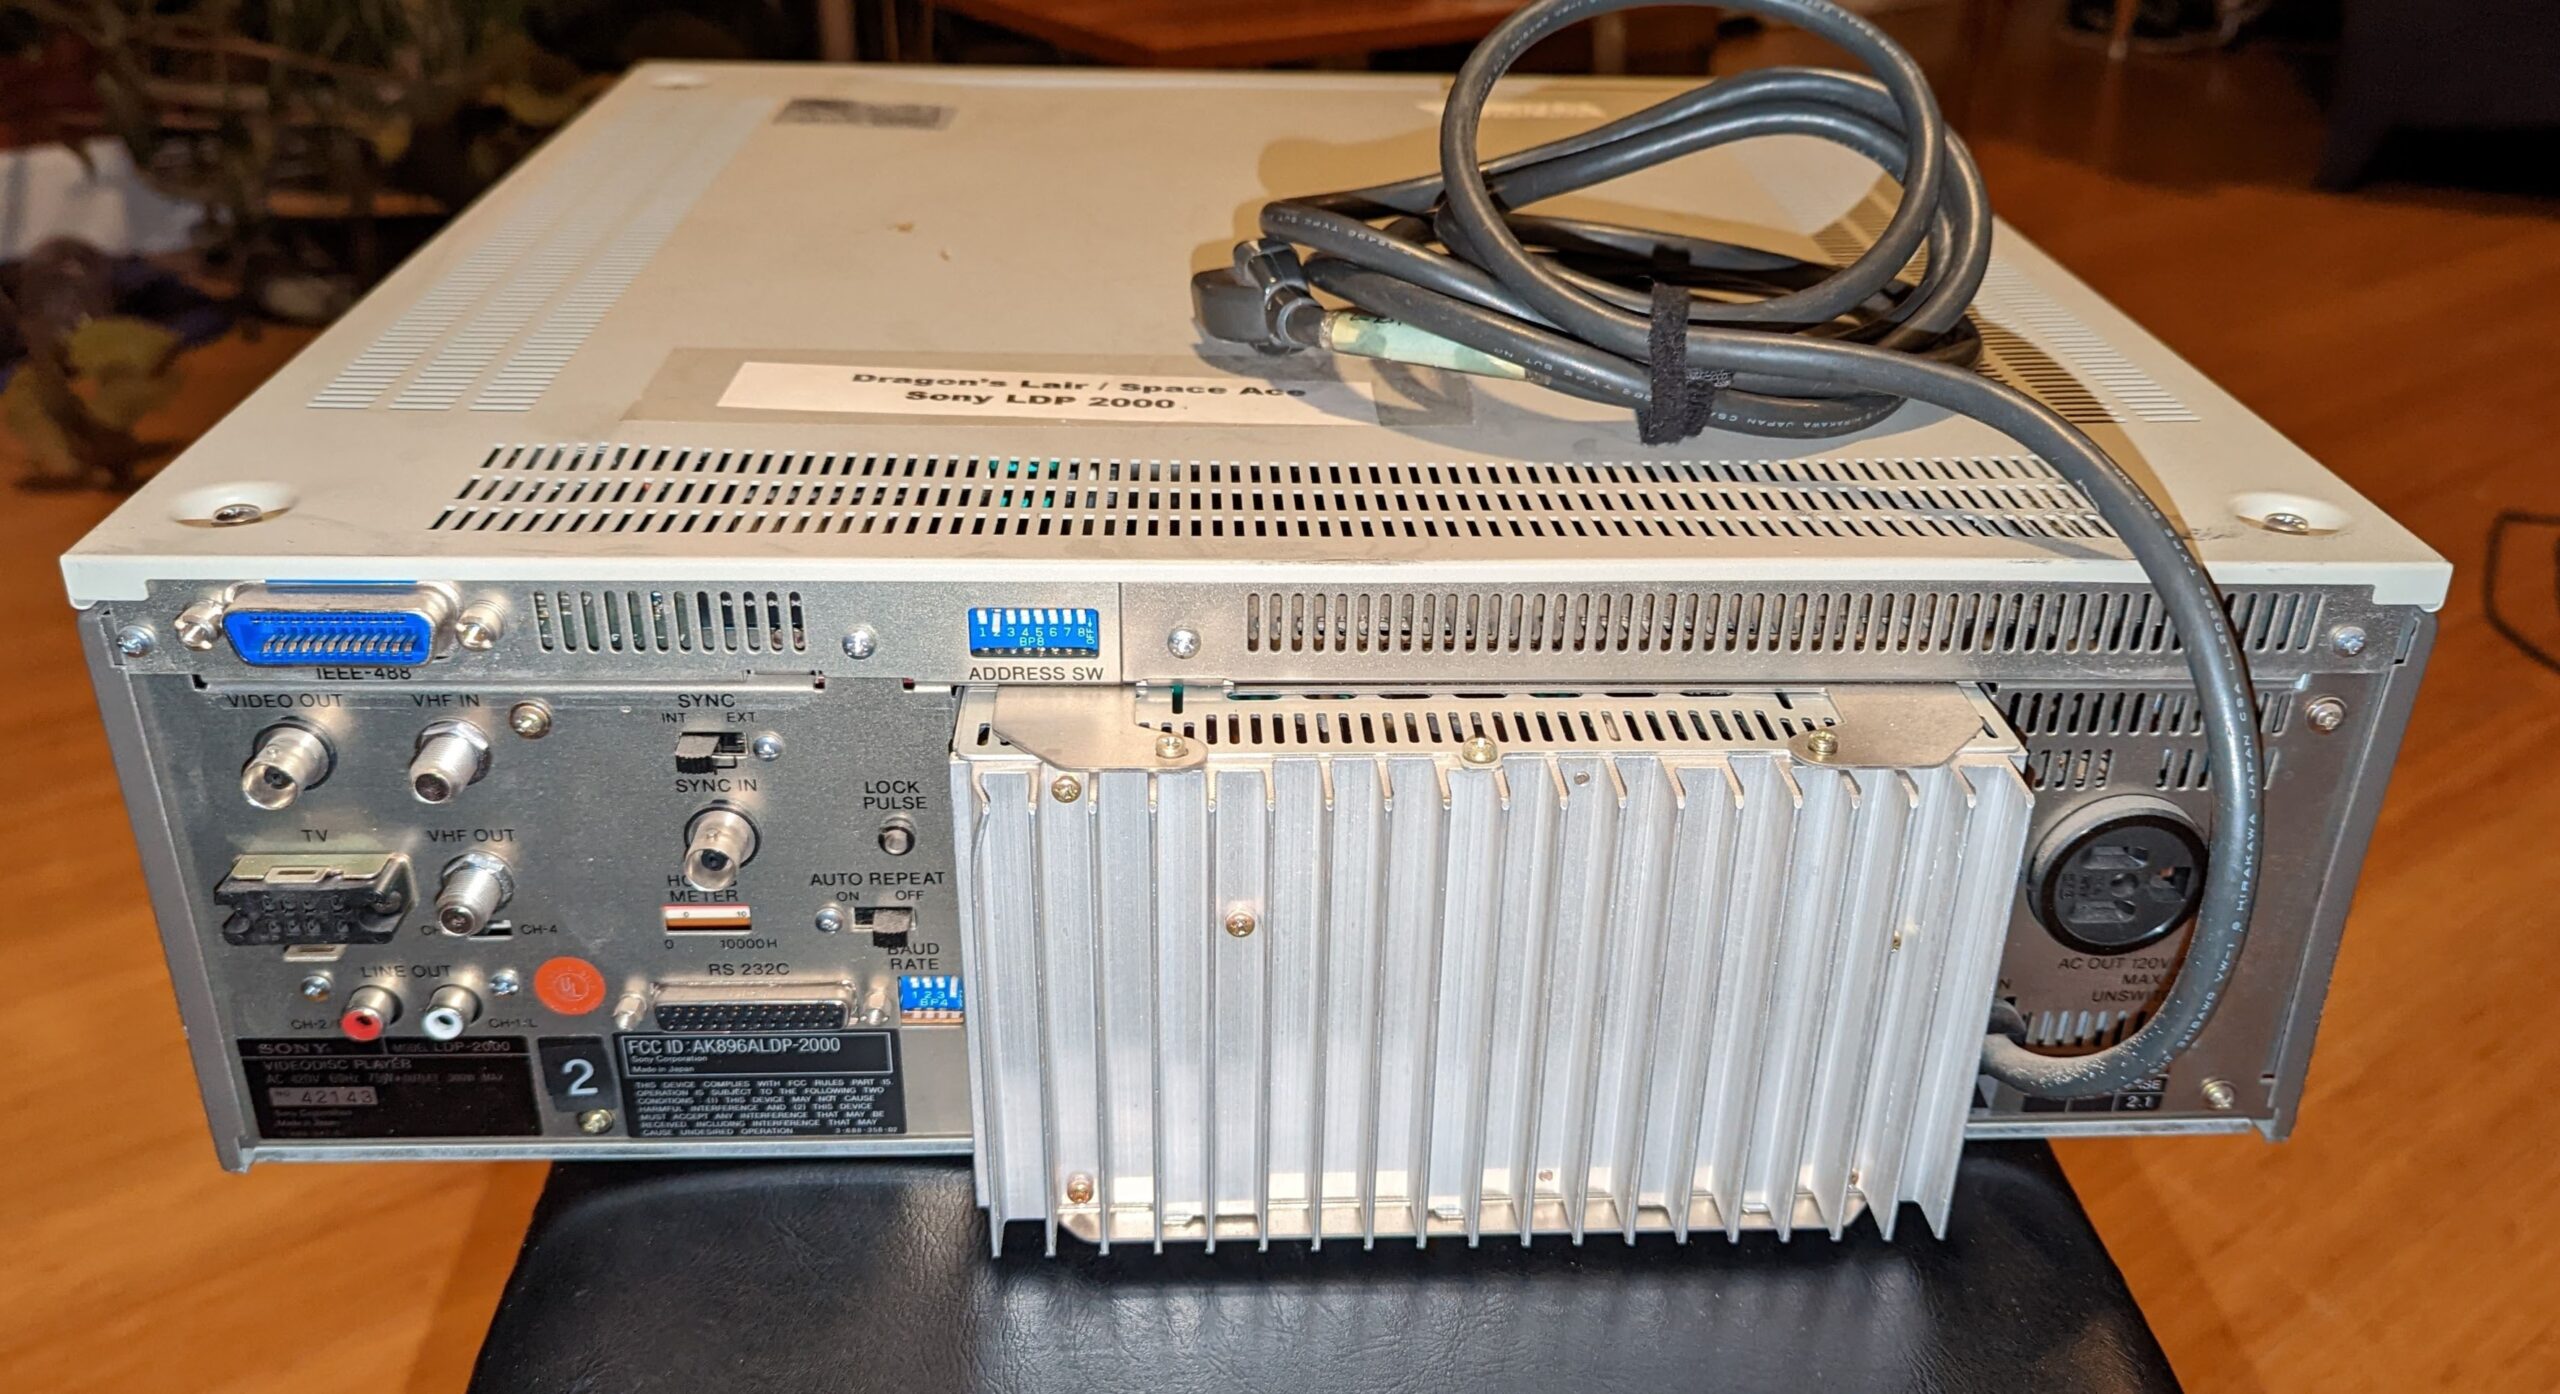 Sony LDP-2000 with IEEE-488 expansion back